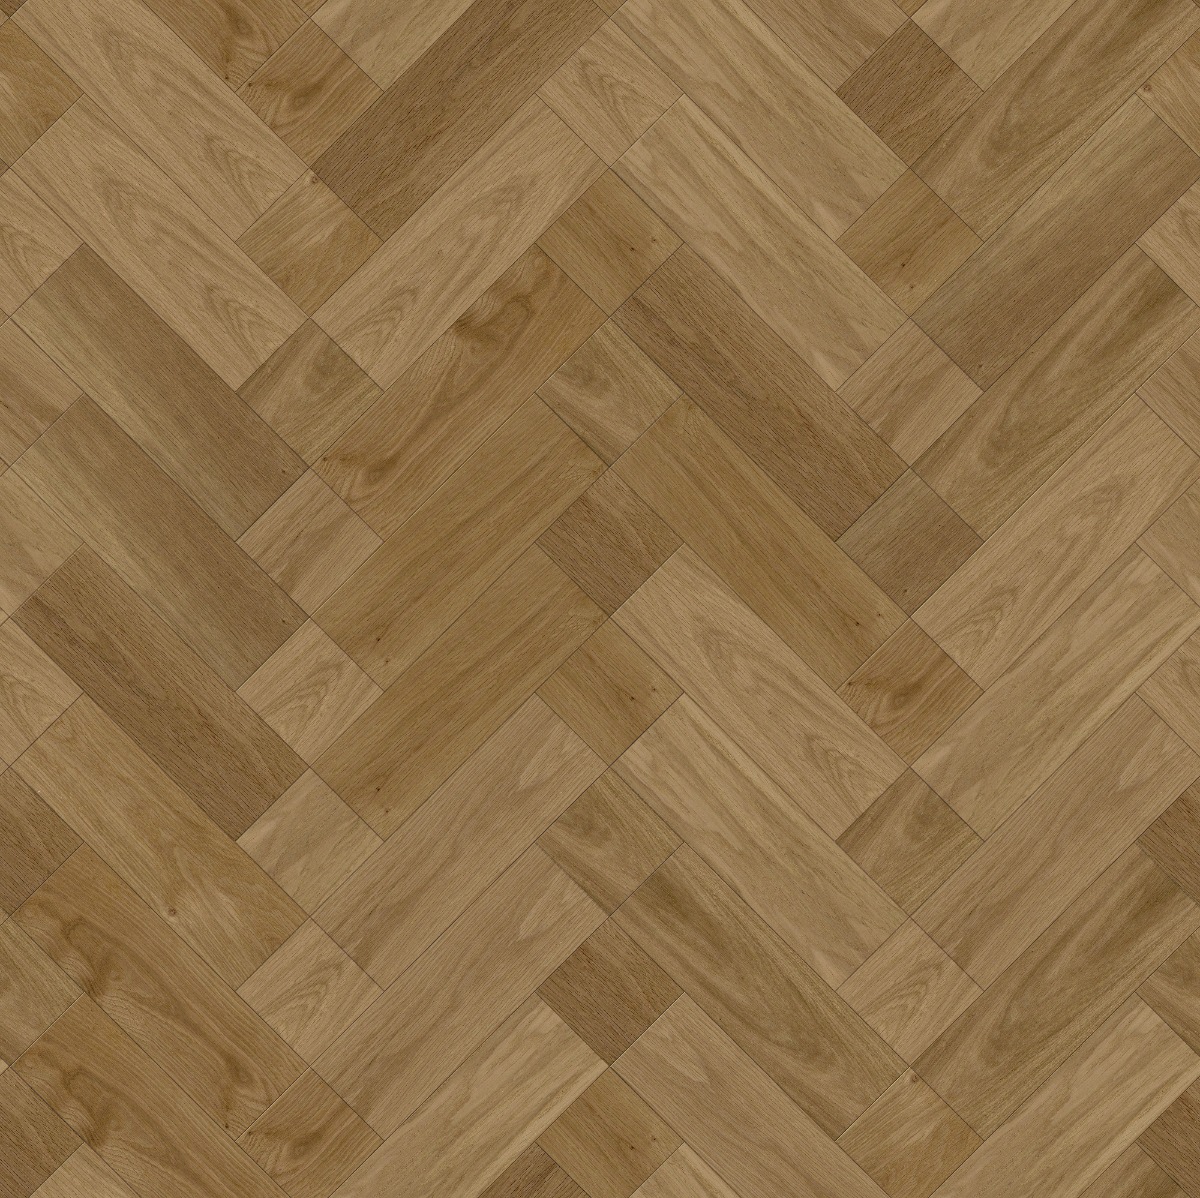 A seamless wood texture with expressive 152 boards arranged in a Chantilly pattern